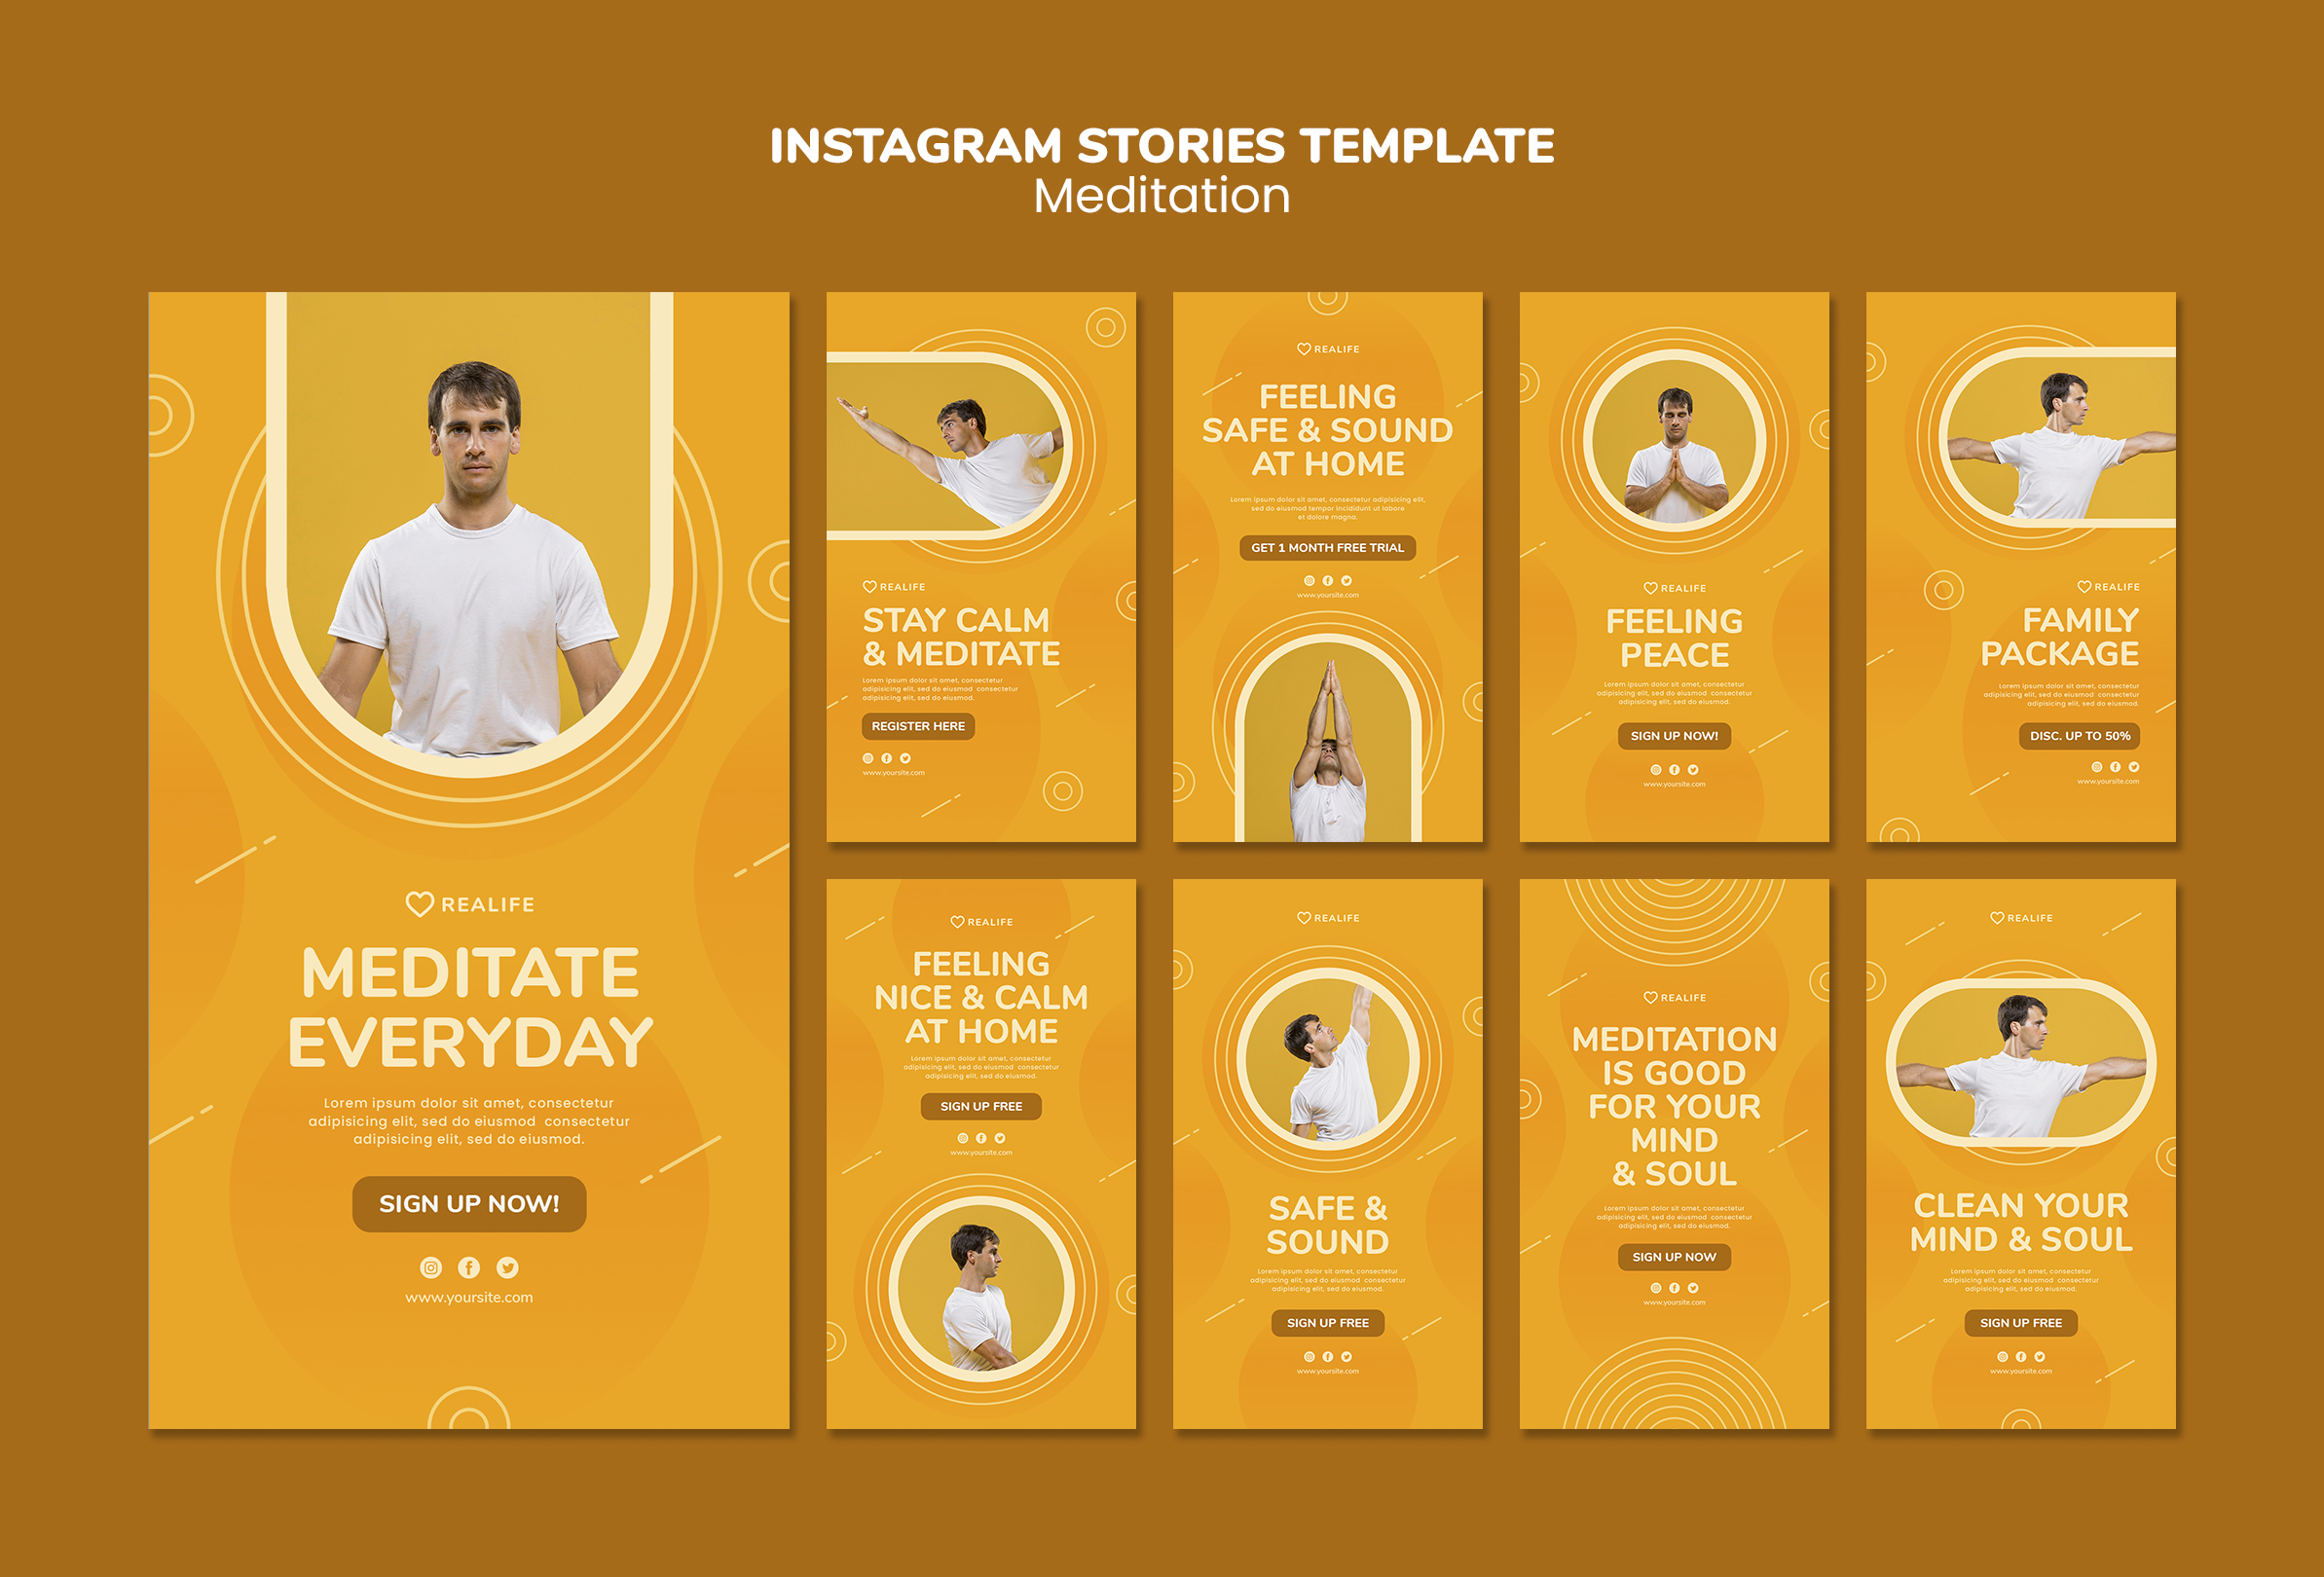 How to Create Engaging Stories on Instagram